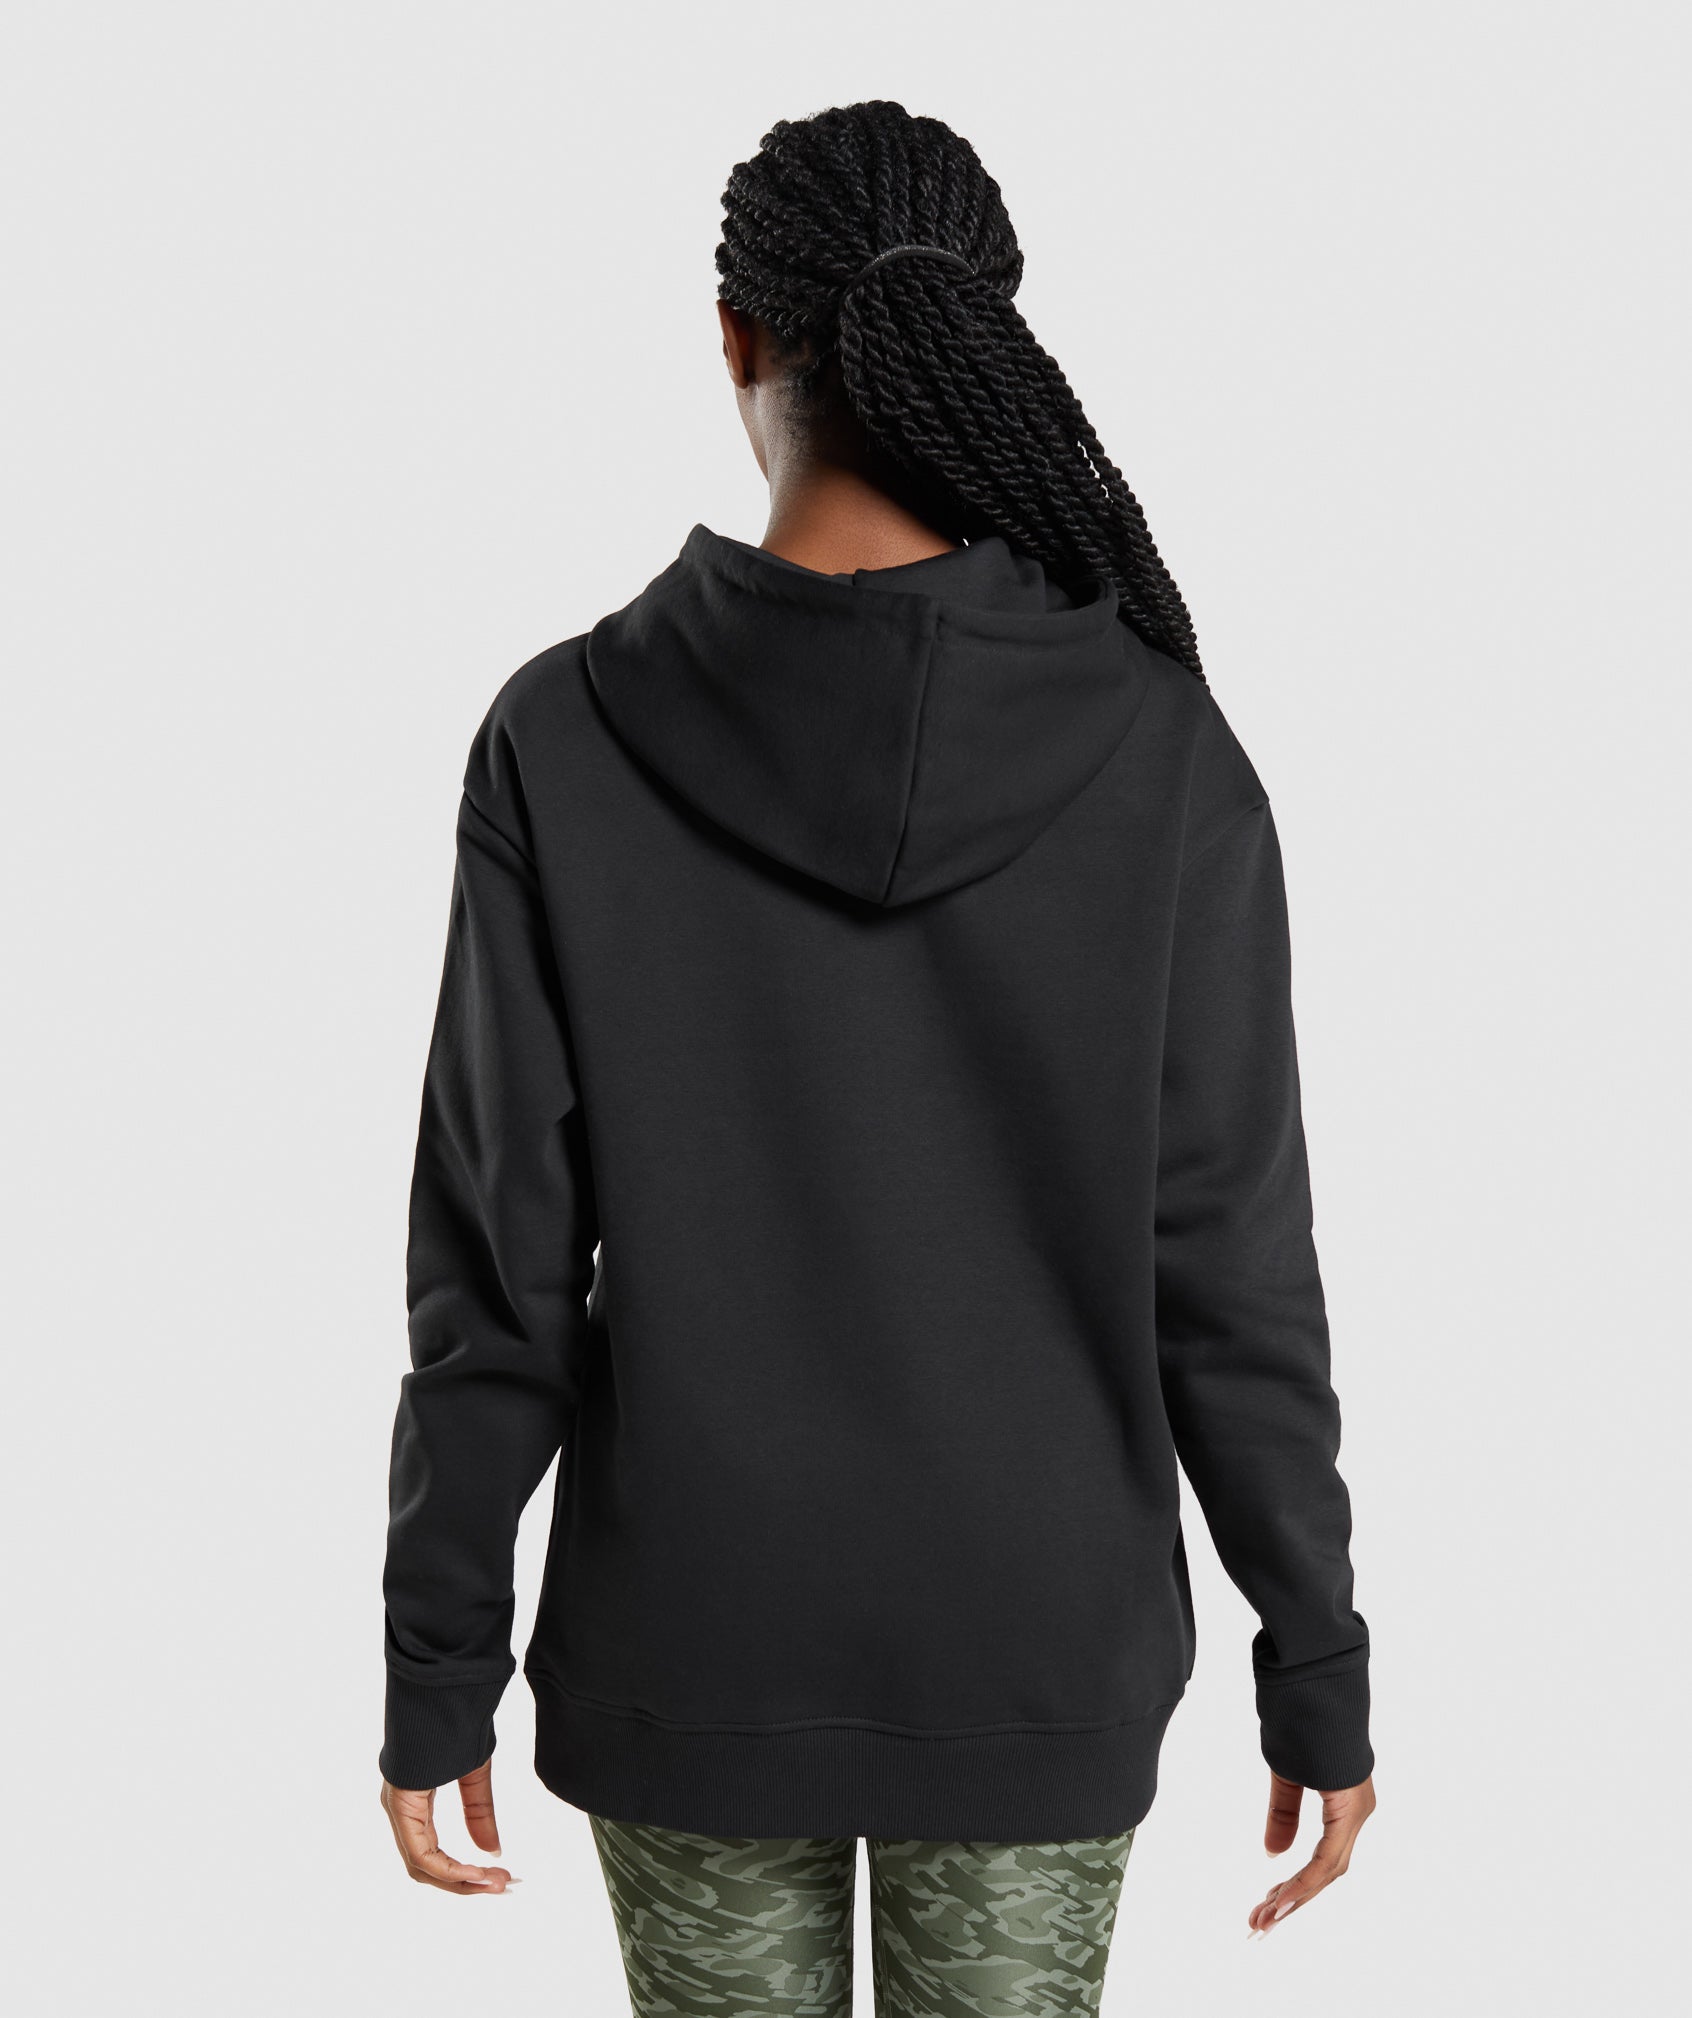 Apollo Oversized Hoodie in Black - view 2